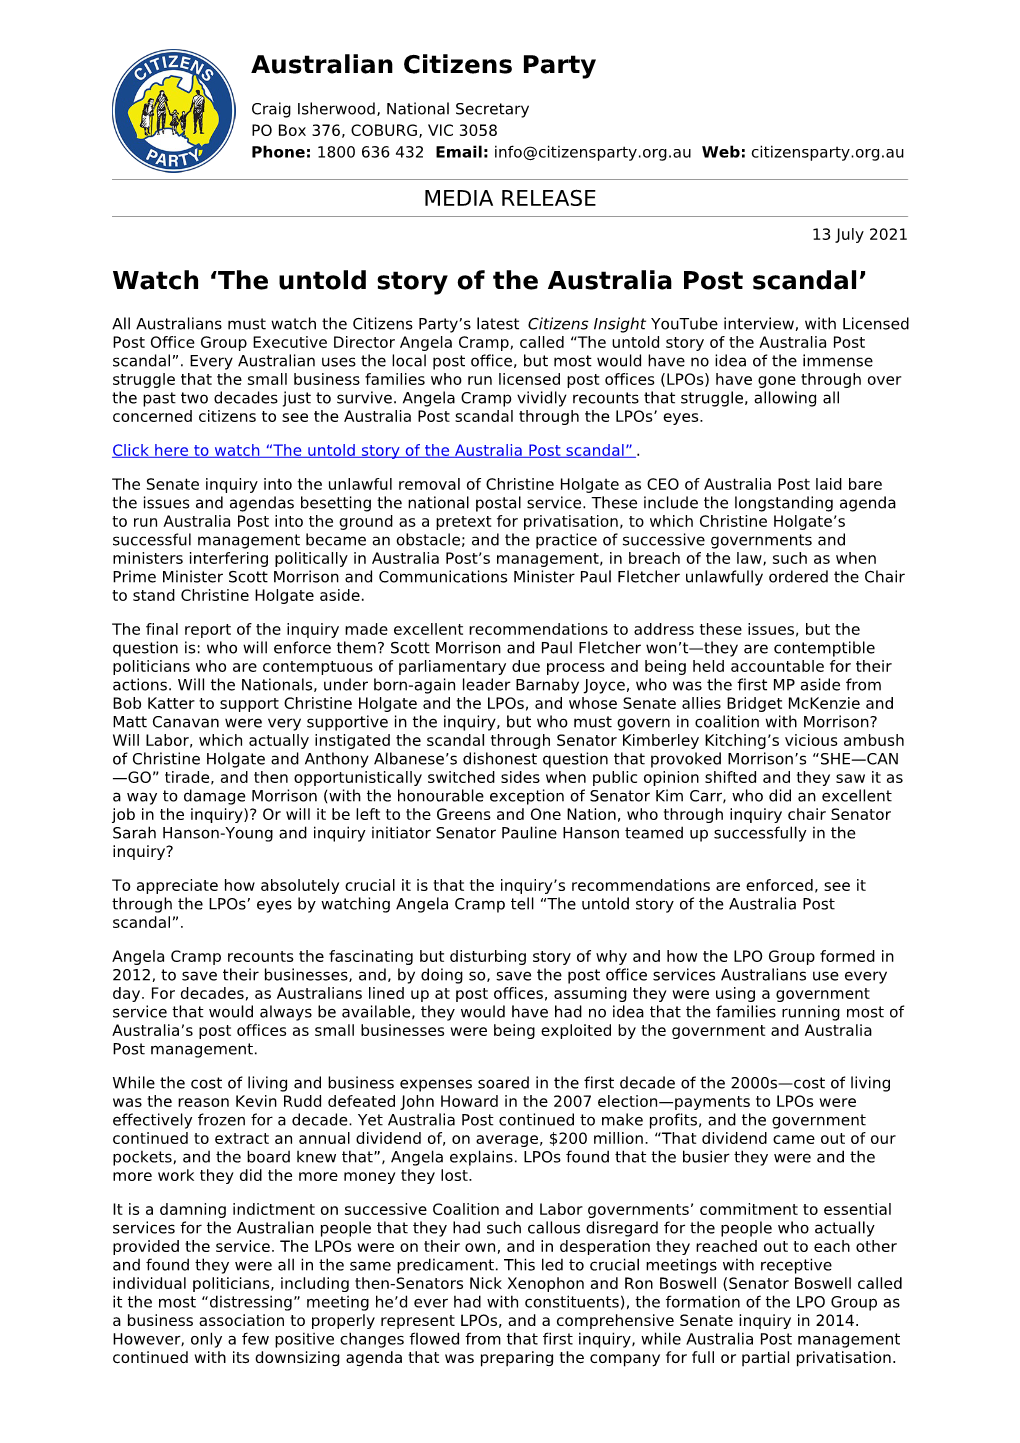 View, with Licensed Post Office Group Executive Director Angela Cramp, Called “The Untold Story of the Australia Post Scandal”